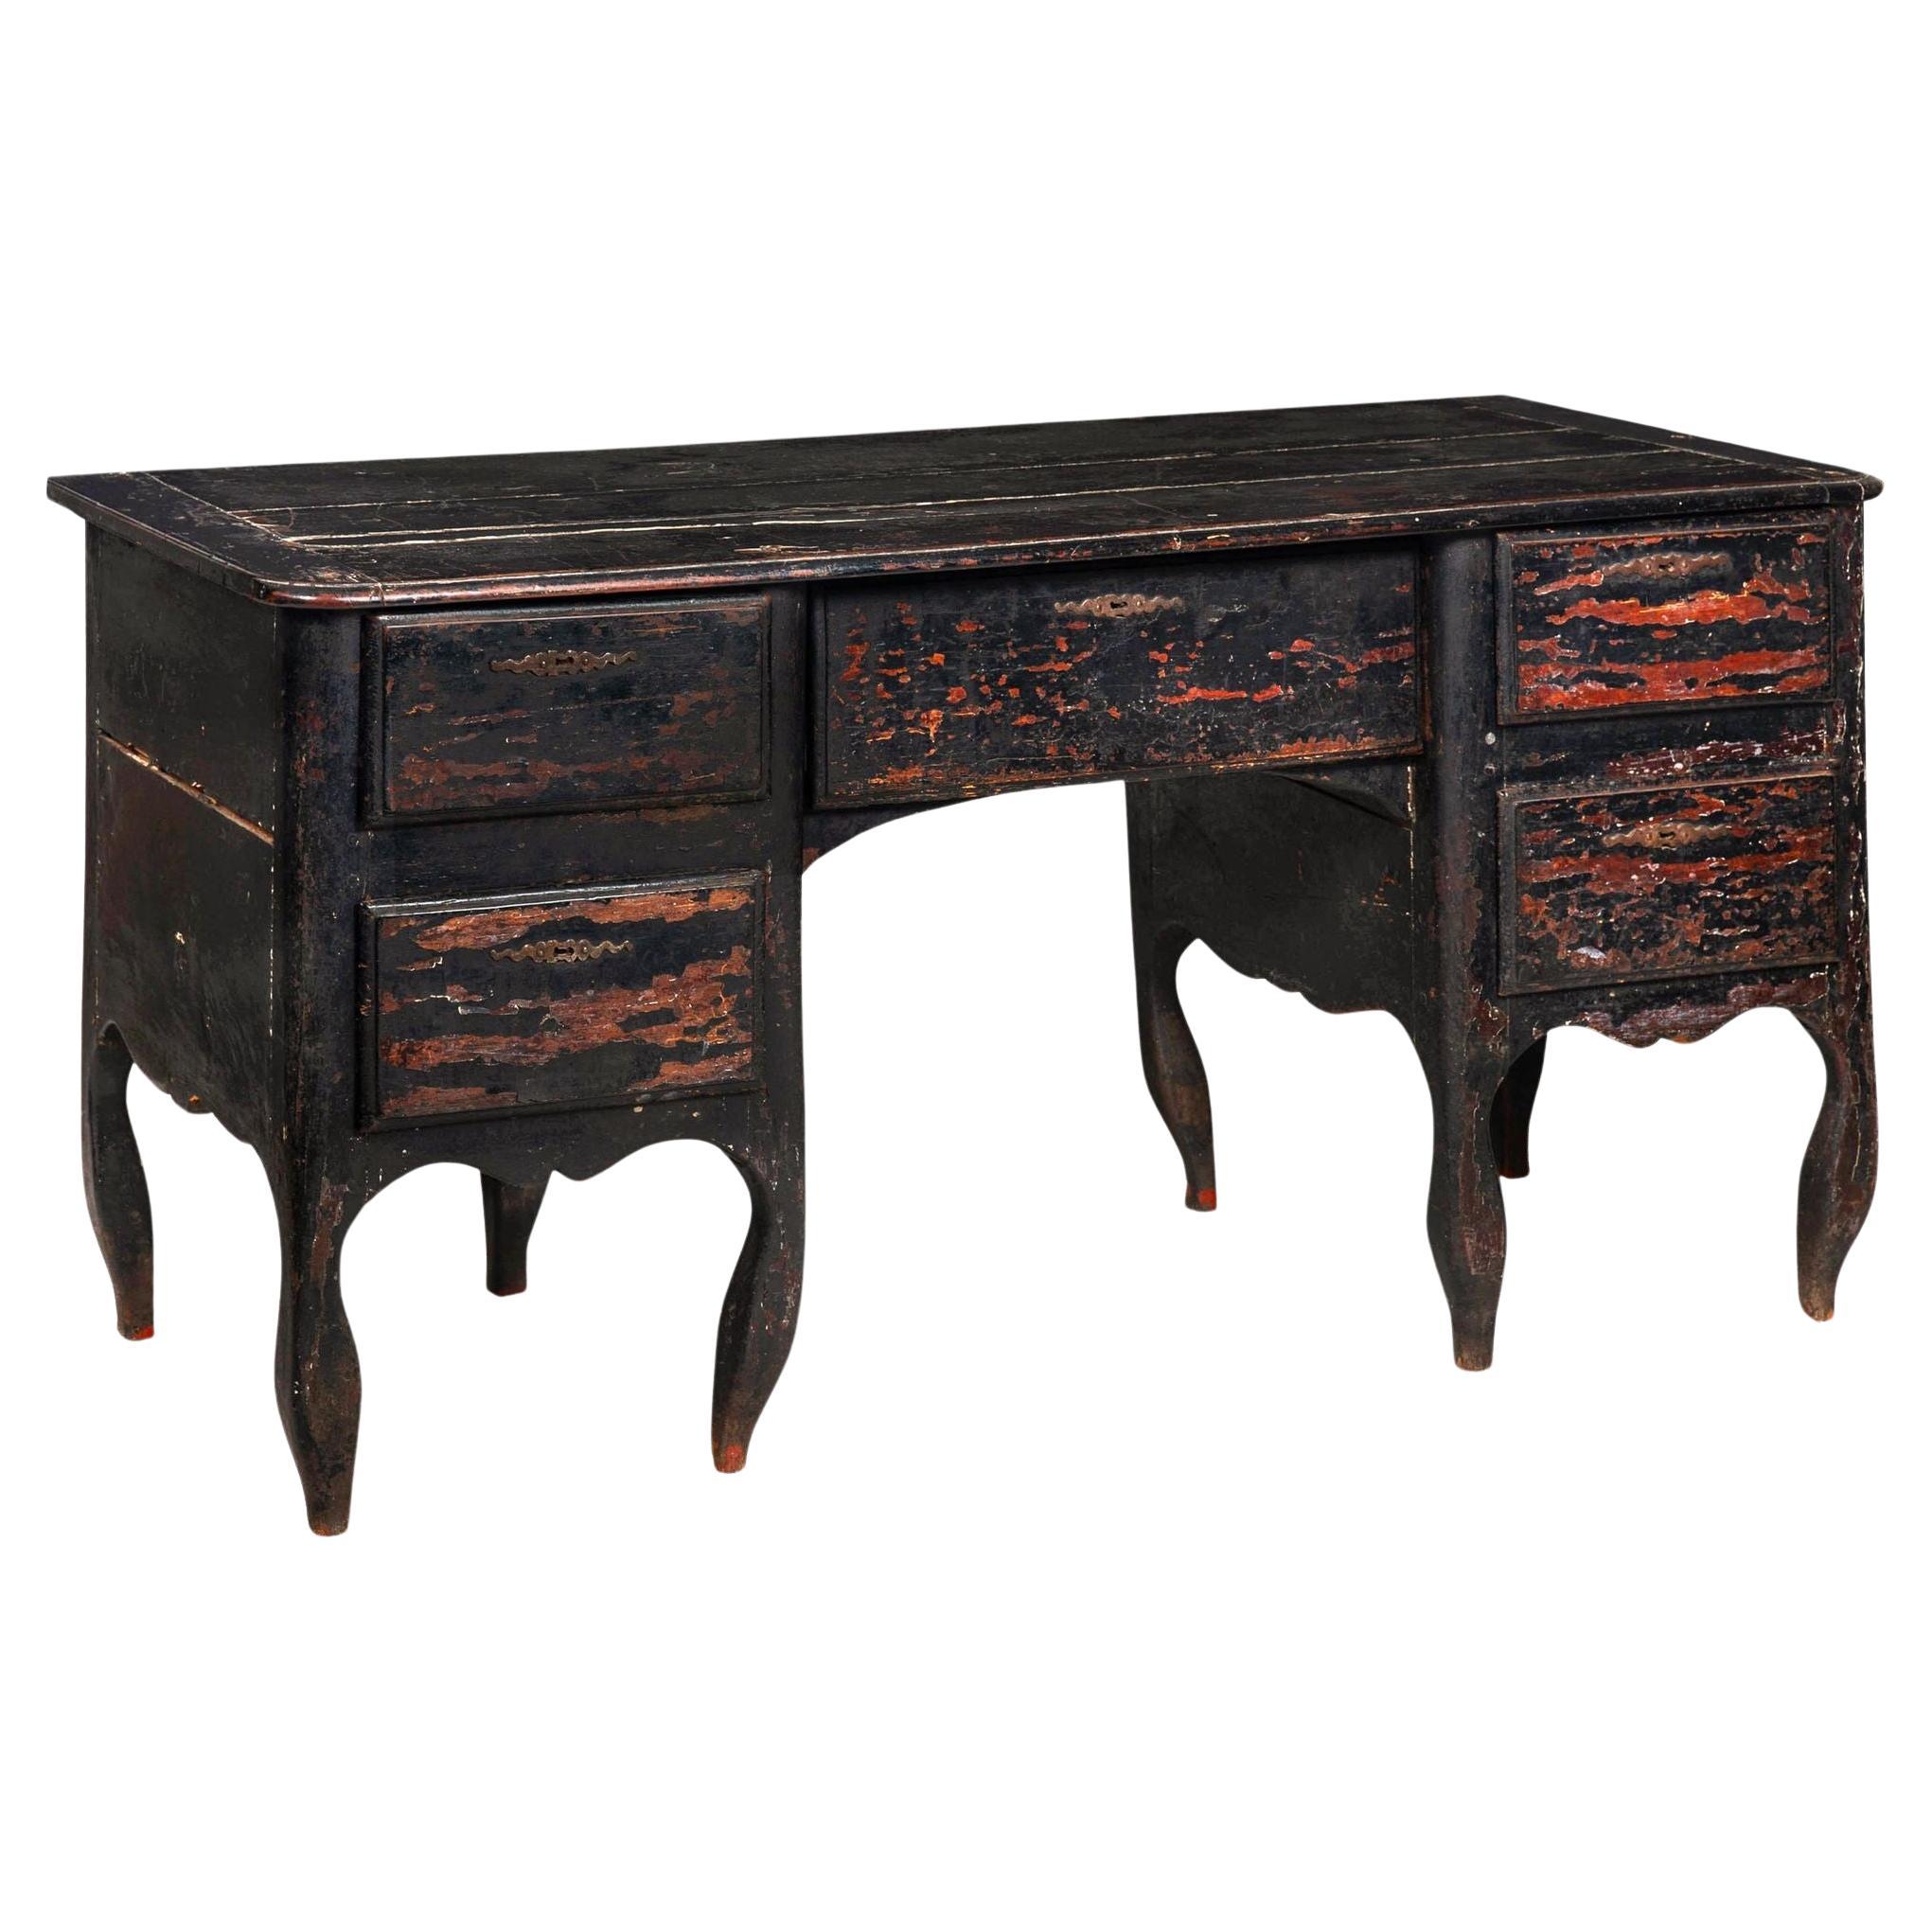 18th Century French Provincial Black Painted “Mazarin” Pedestal Desk For Sale